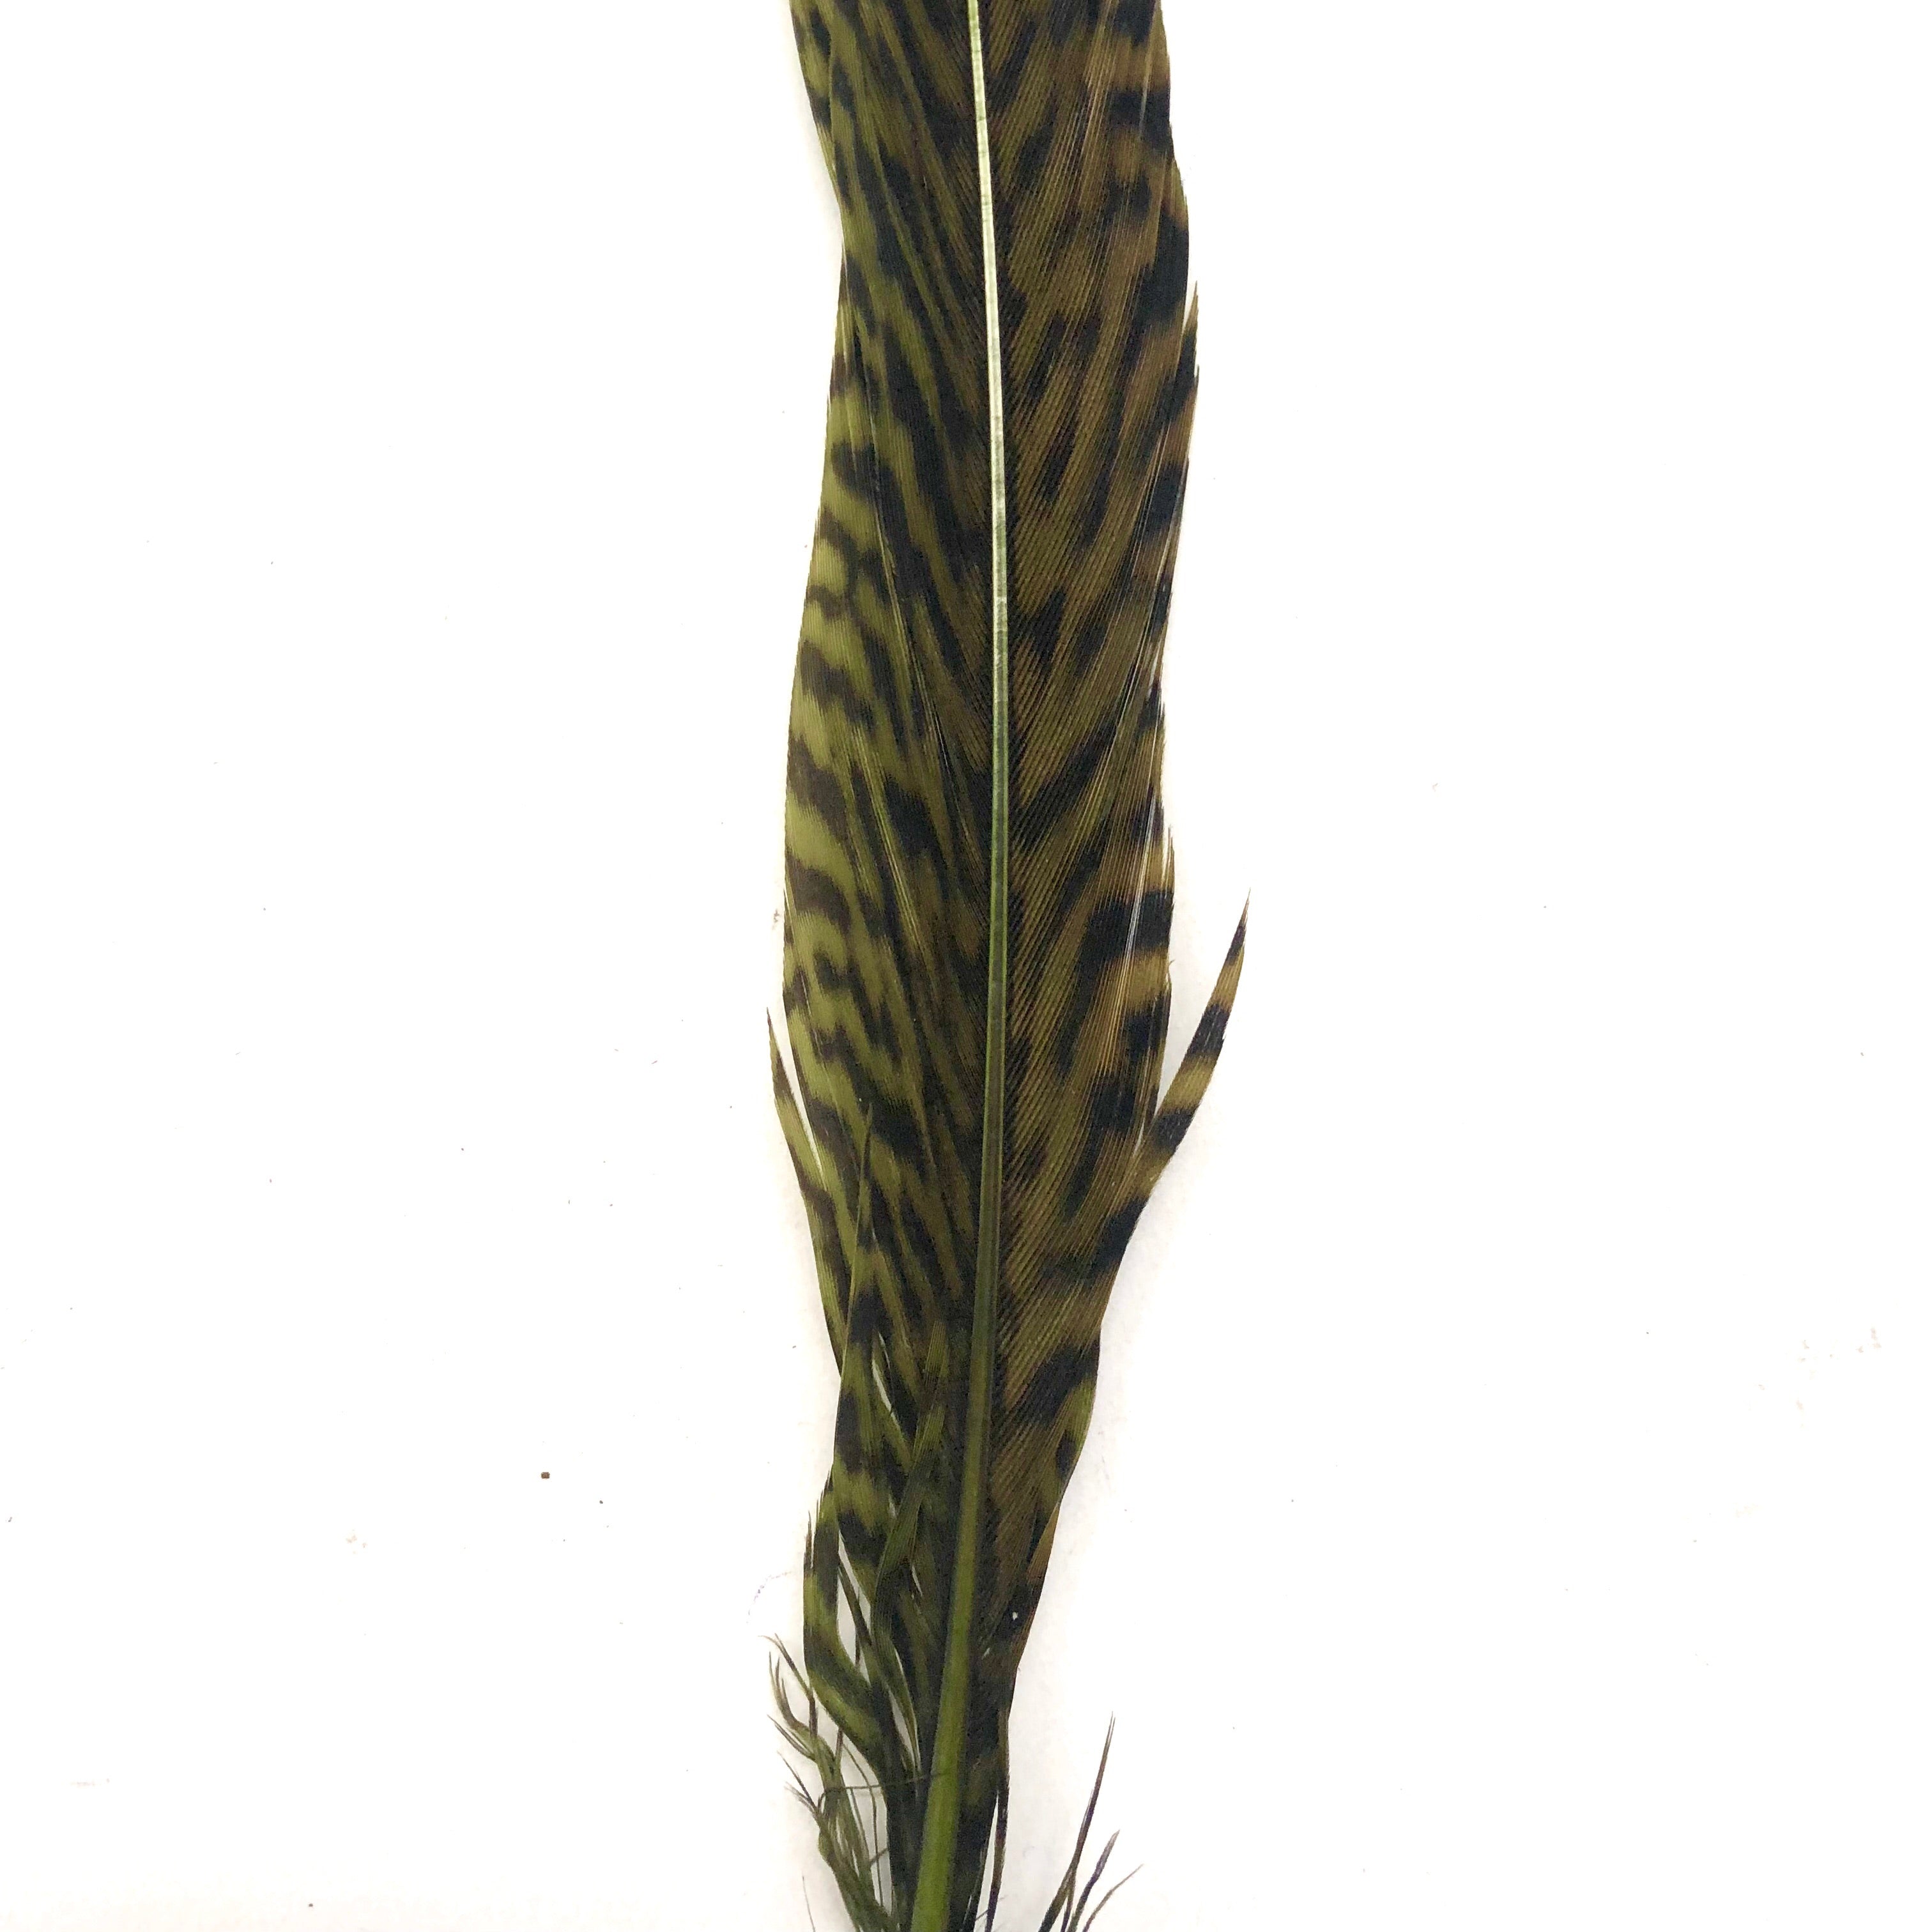 6" to 10" Golden Pheasant Side Tail Feather x 10 pcs - Olive Green